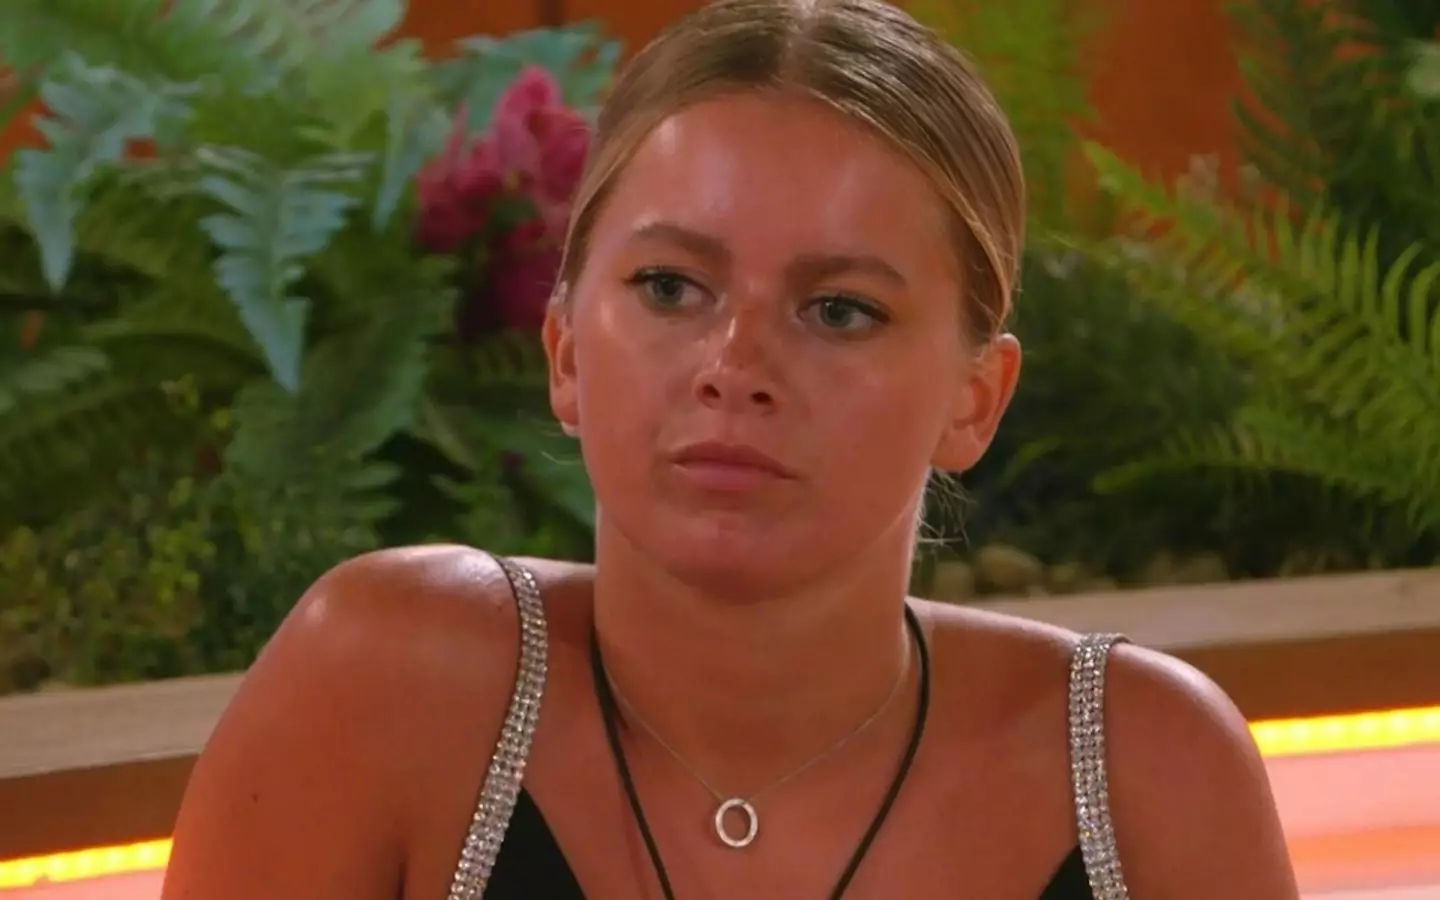 People have accused some of the islanders of 'bullying' Tasha.